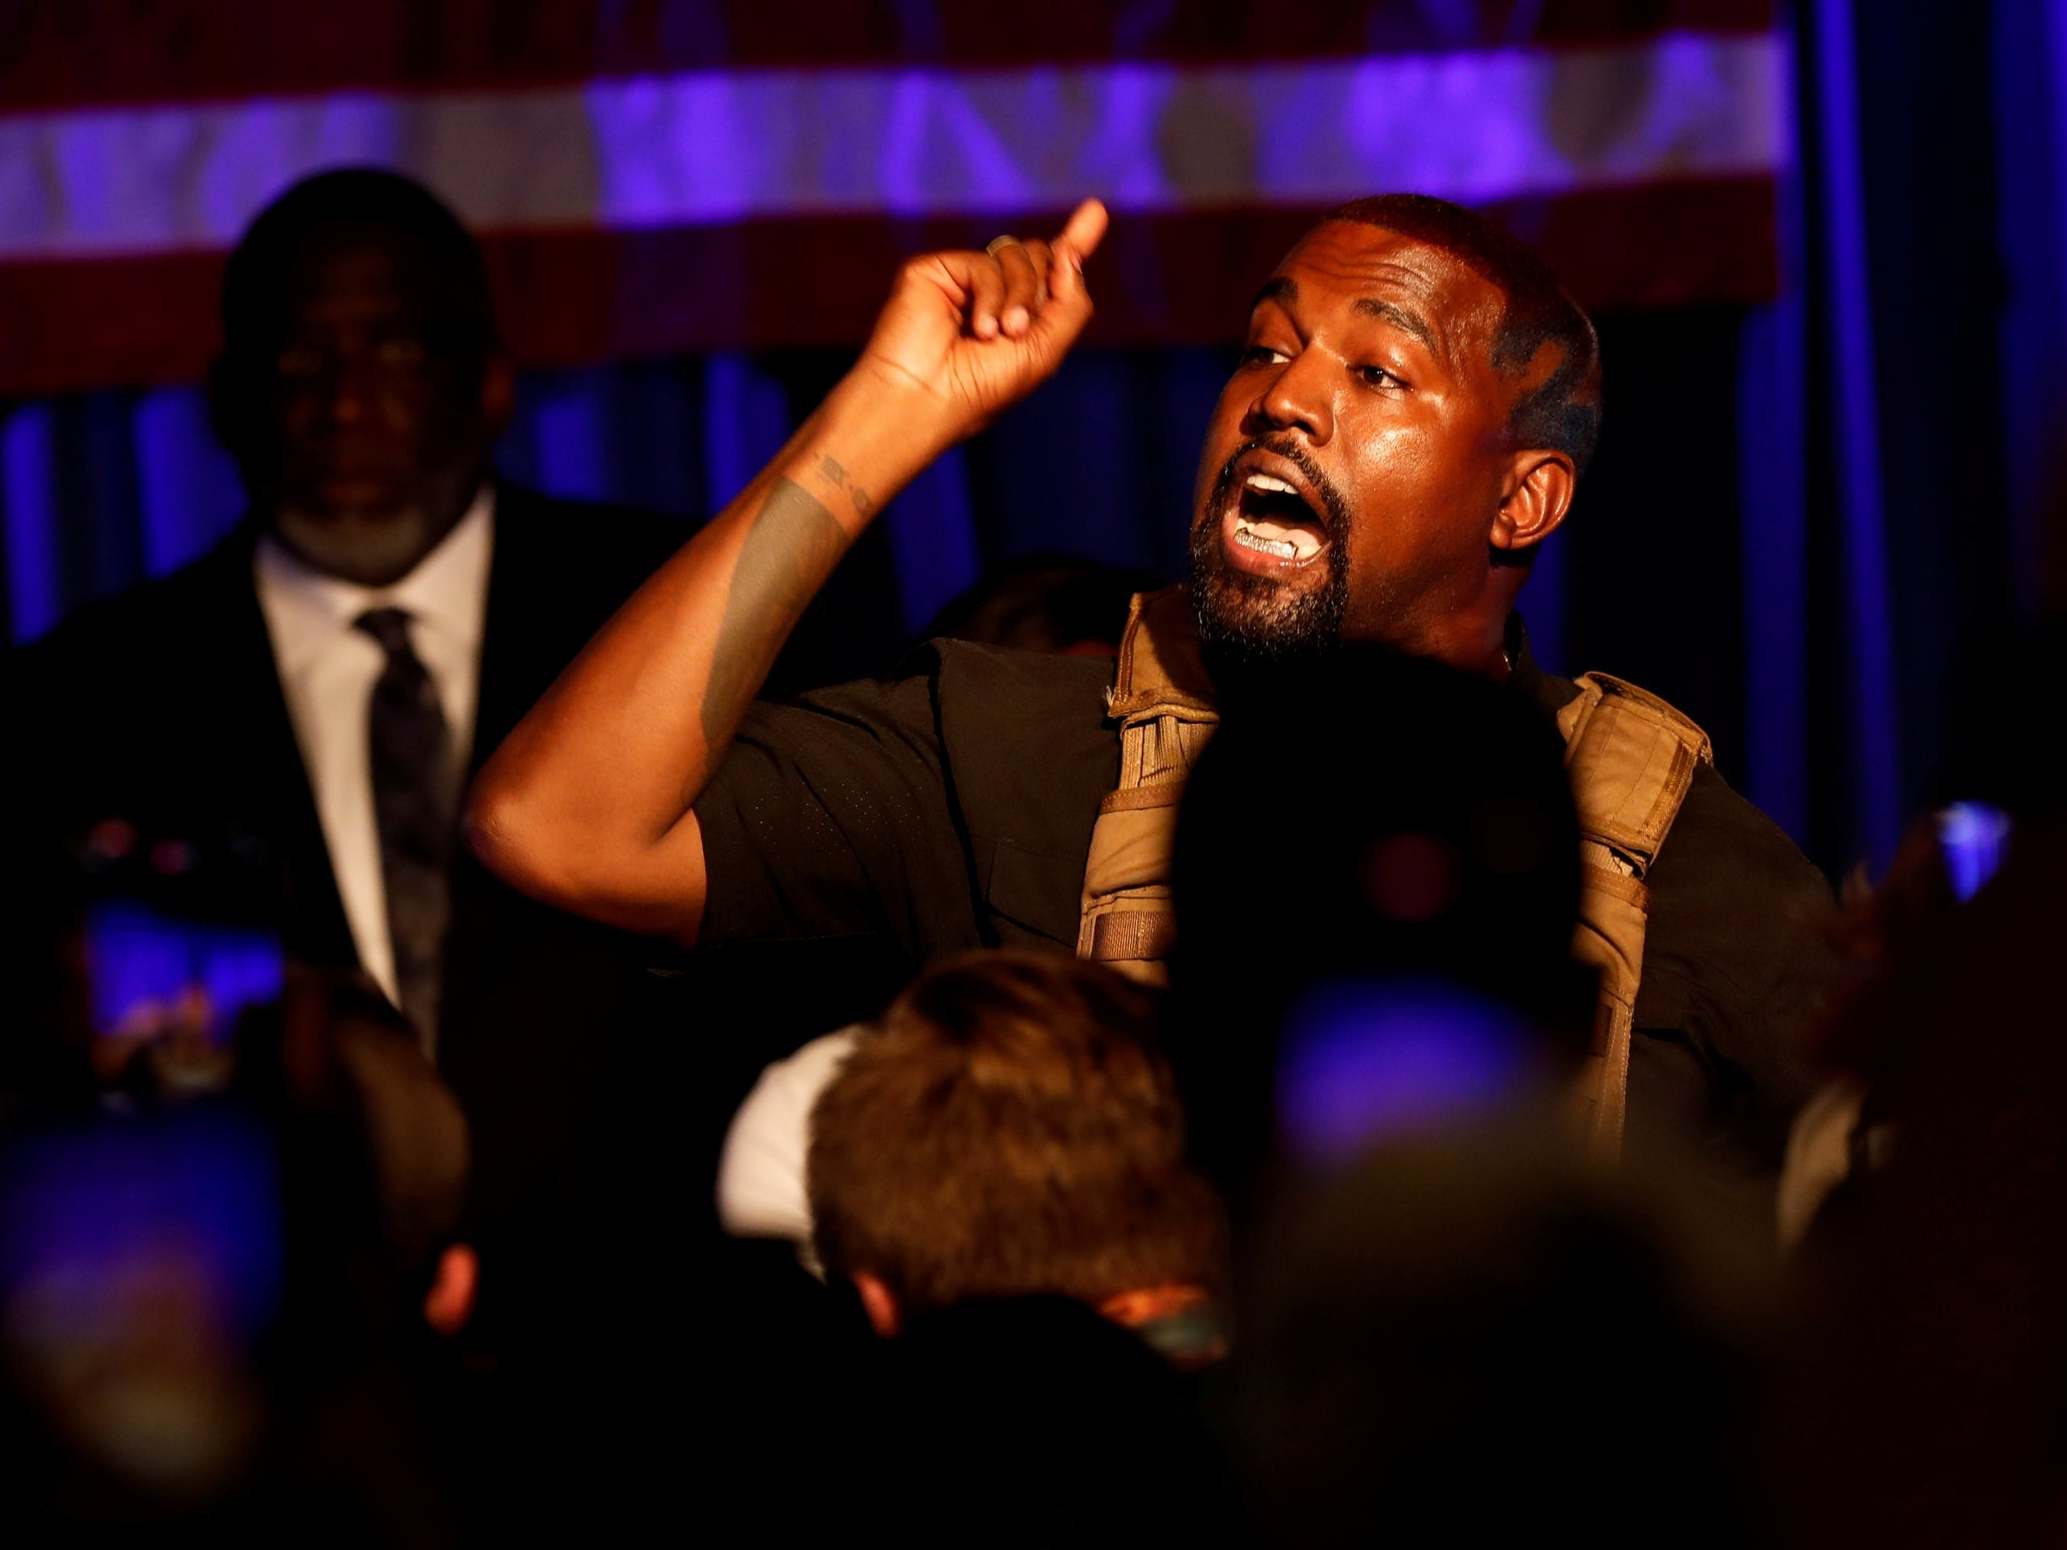 Kanye West held his first campaign rally in South Carolina